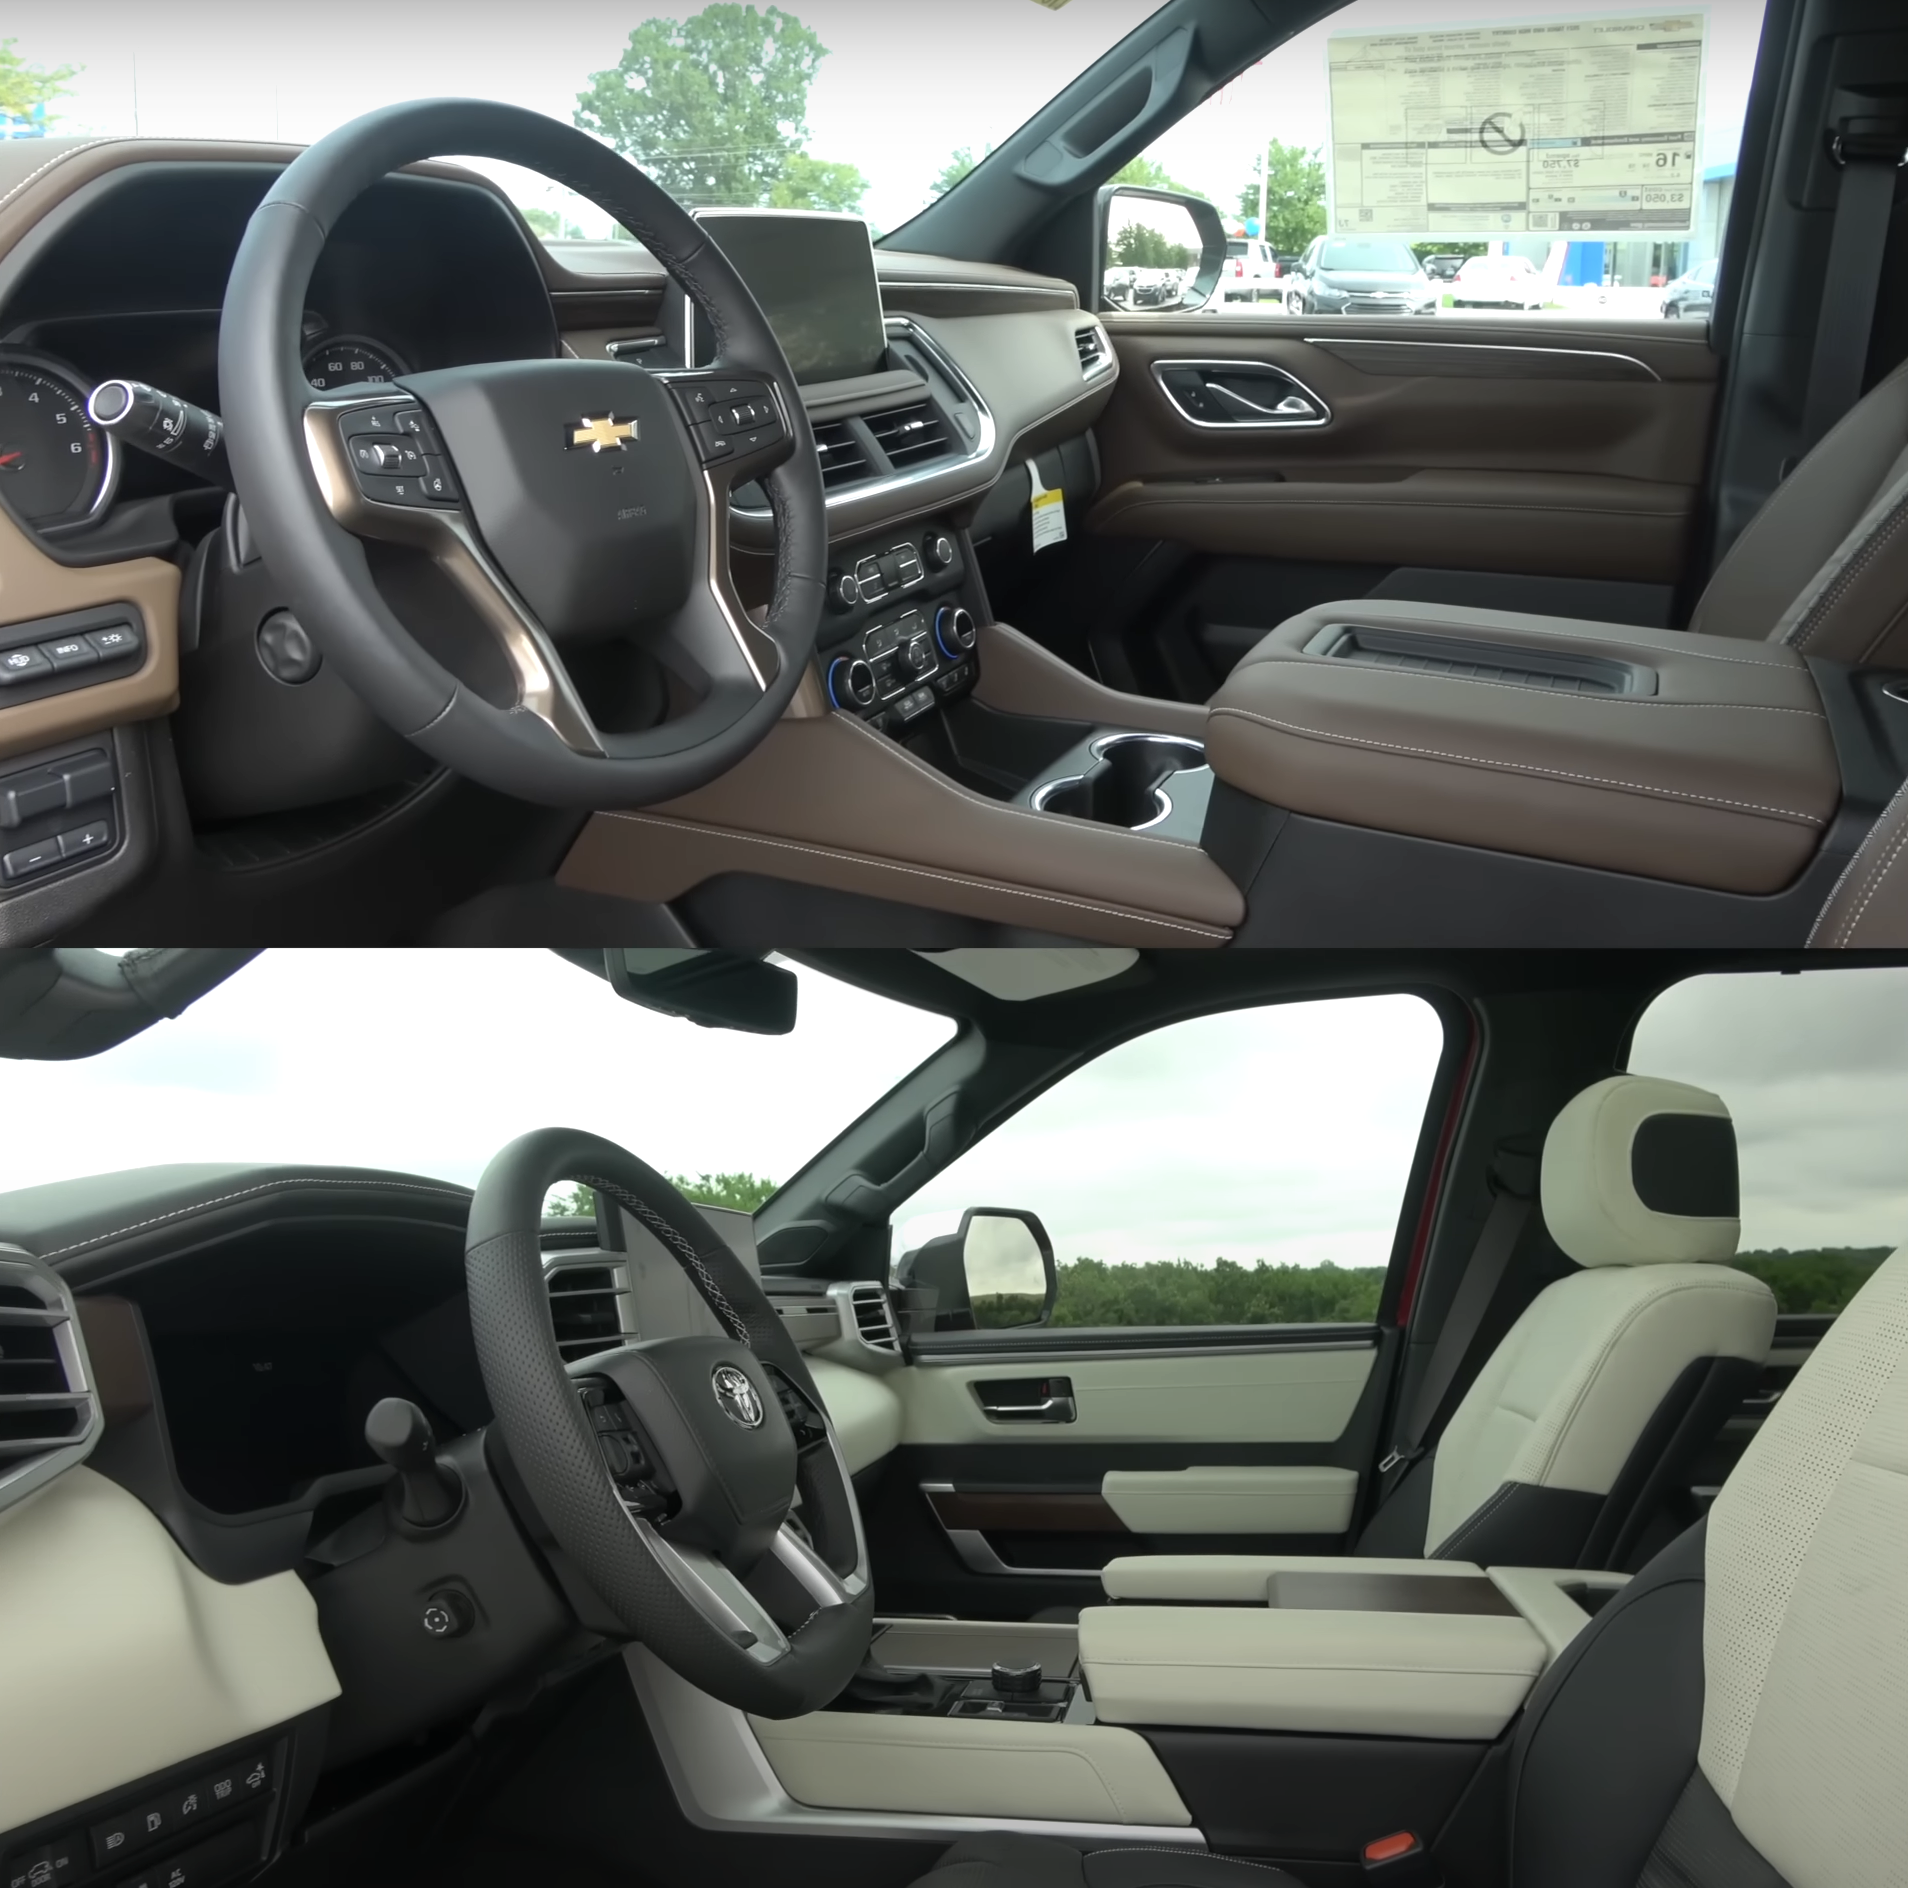 Chevy Tahoe and Toyota Sequoia interiors side by side